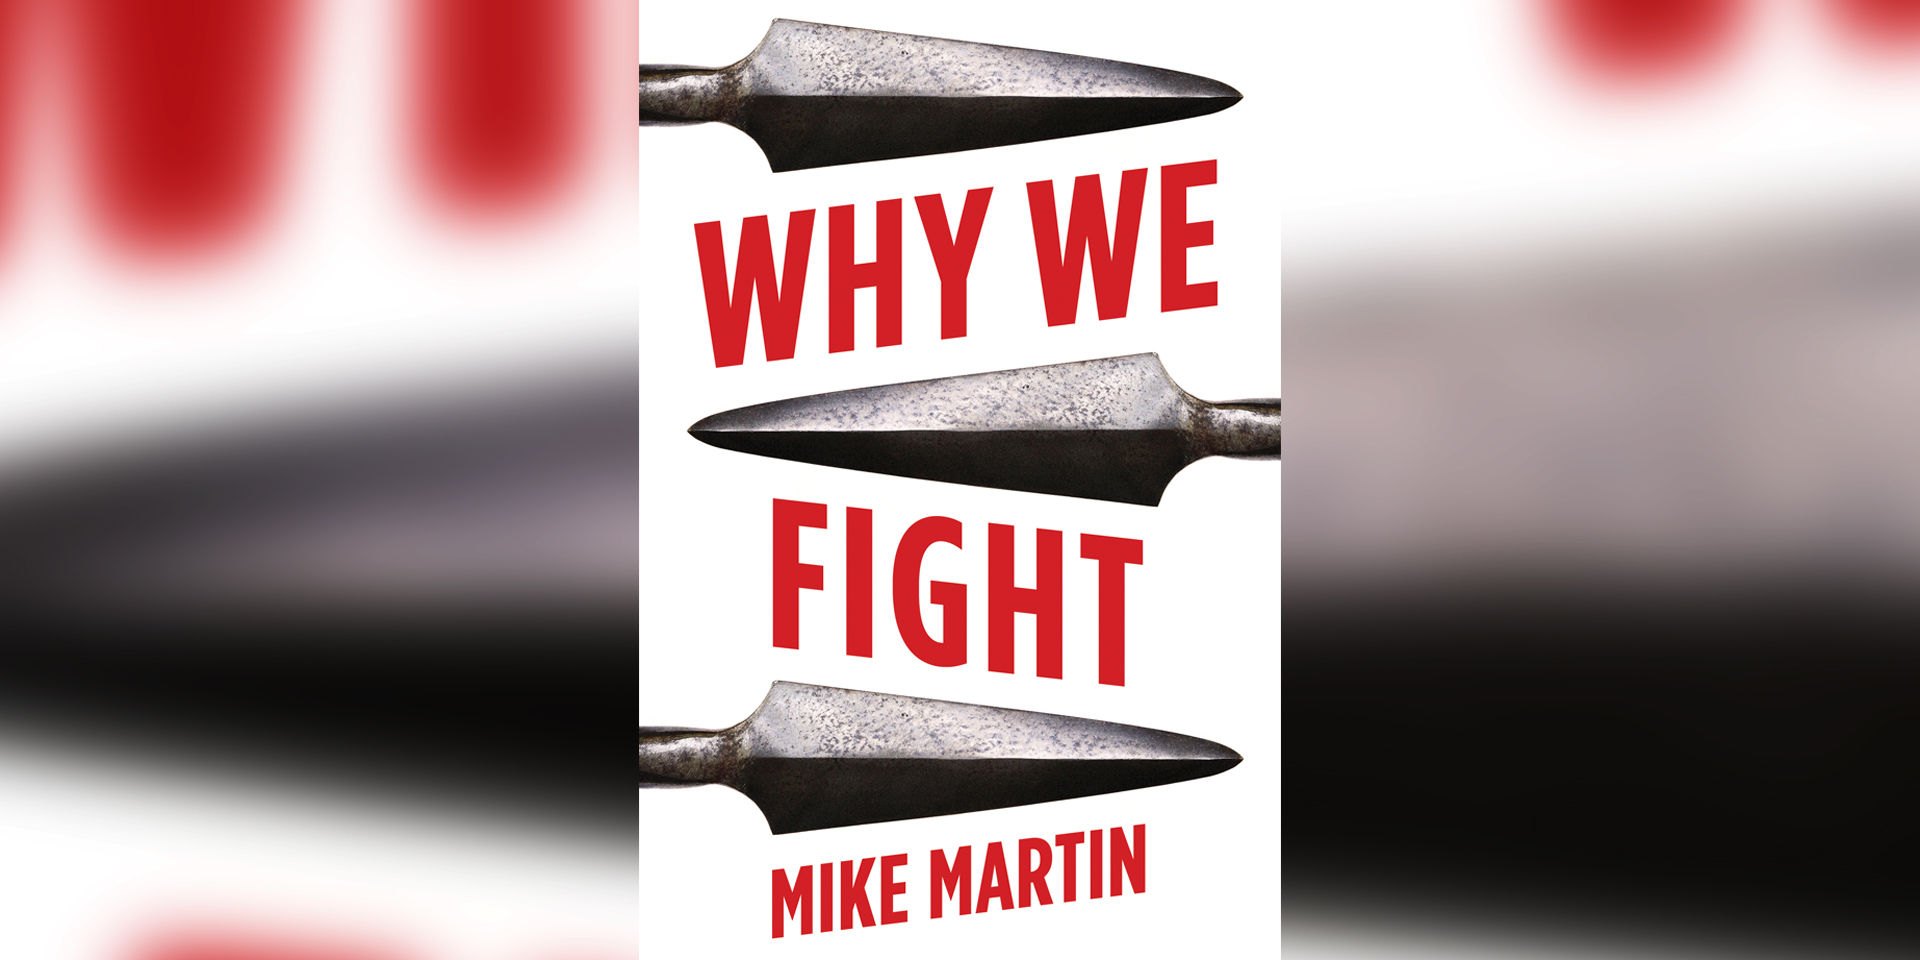 Wy we fight book cover